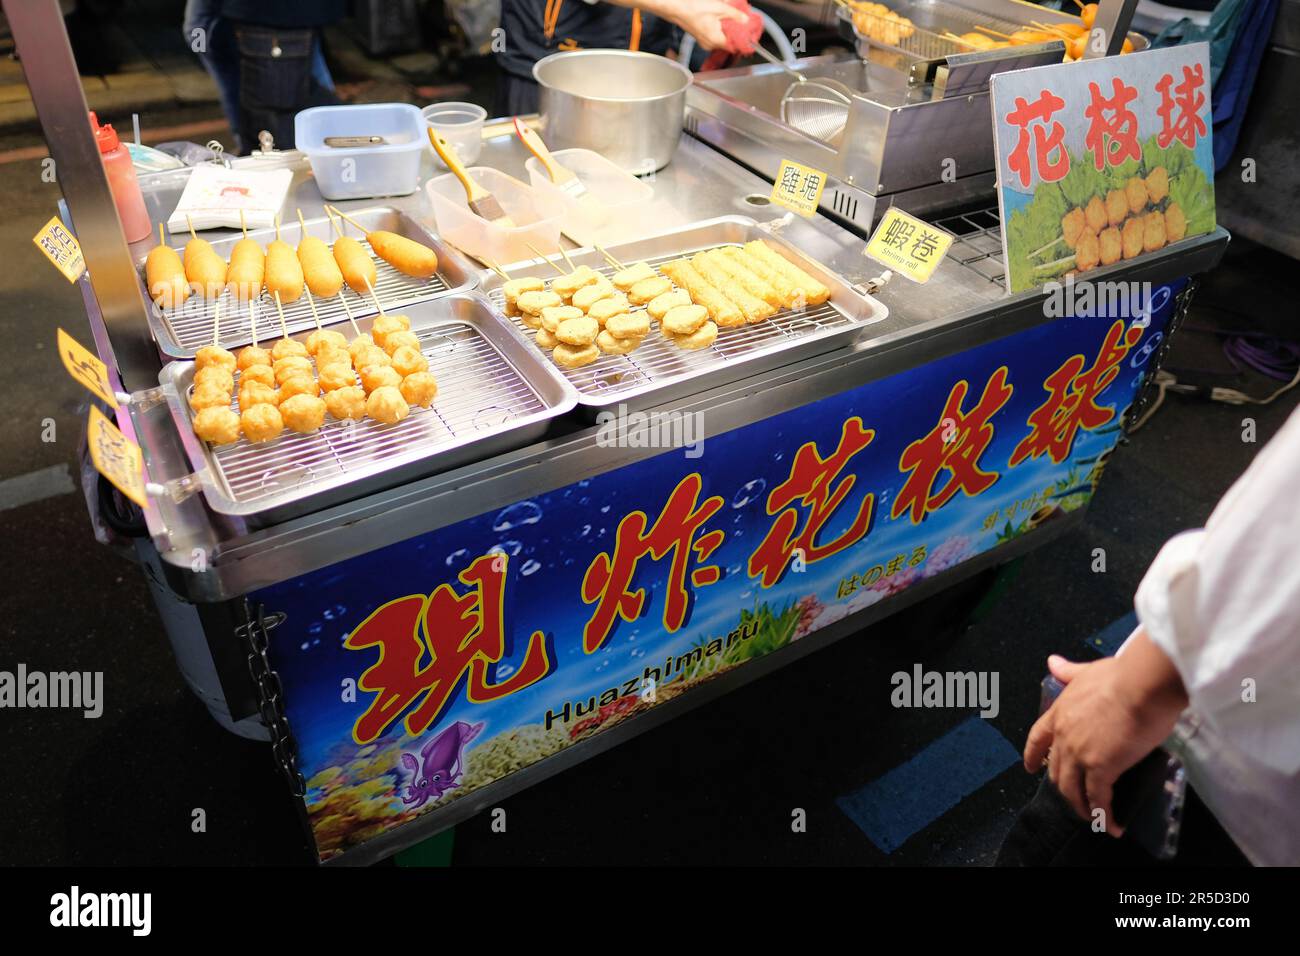 Fried food stand at Huaxi Street Tourist Night Market in Taipei, Taiwan; shrimp roll, chicken nugget, corn dog cart; Taiwanese food. Stock Photo